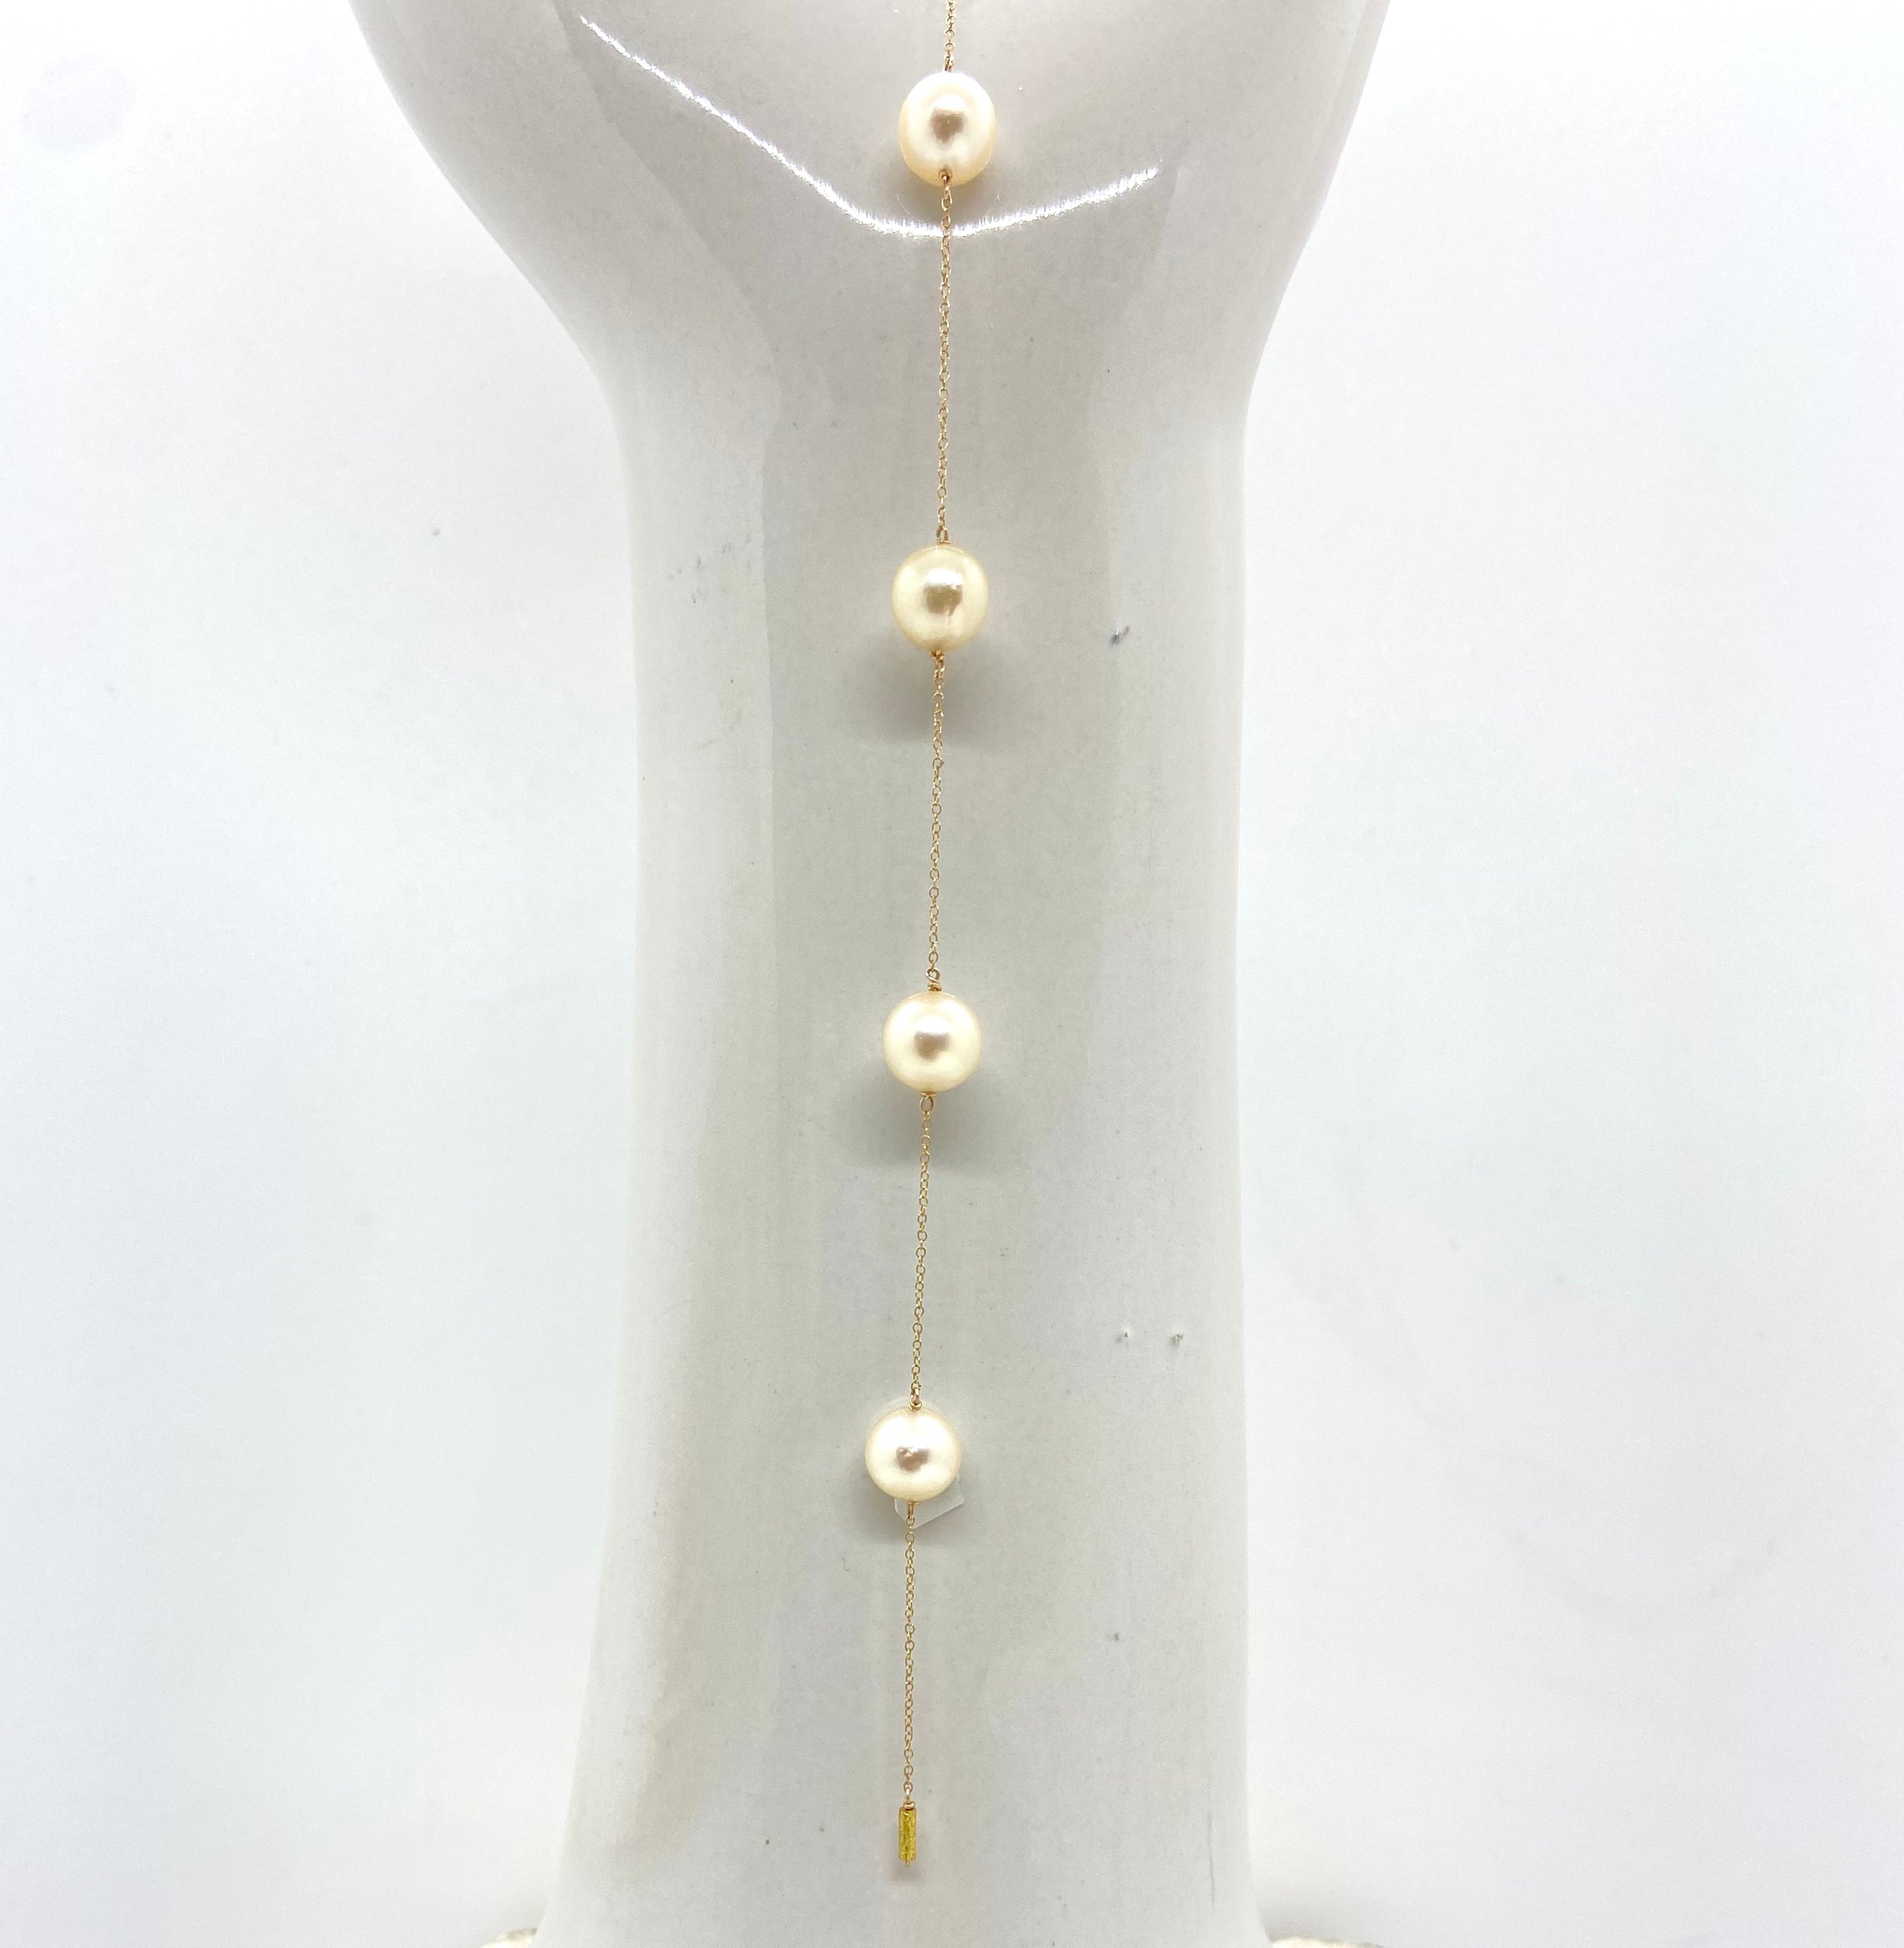 14k Gold Chain Necklace w/ Japanese Akoya Pearls & 18k Gold Hand-Carved Pendant